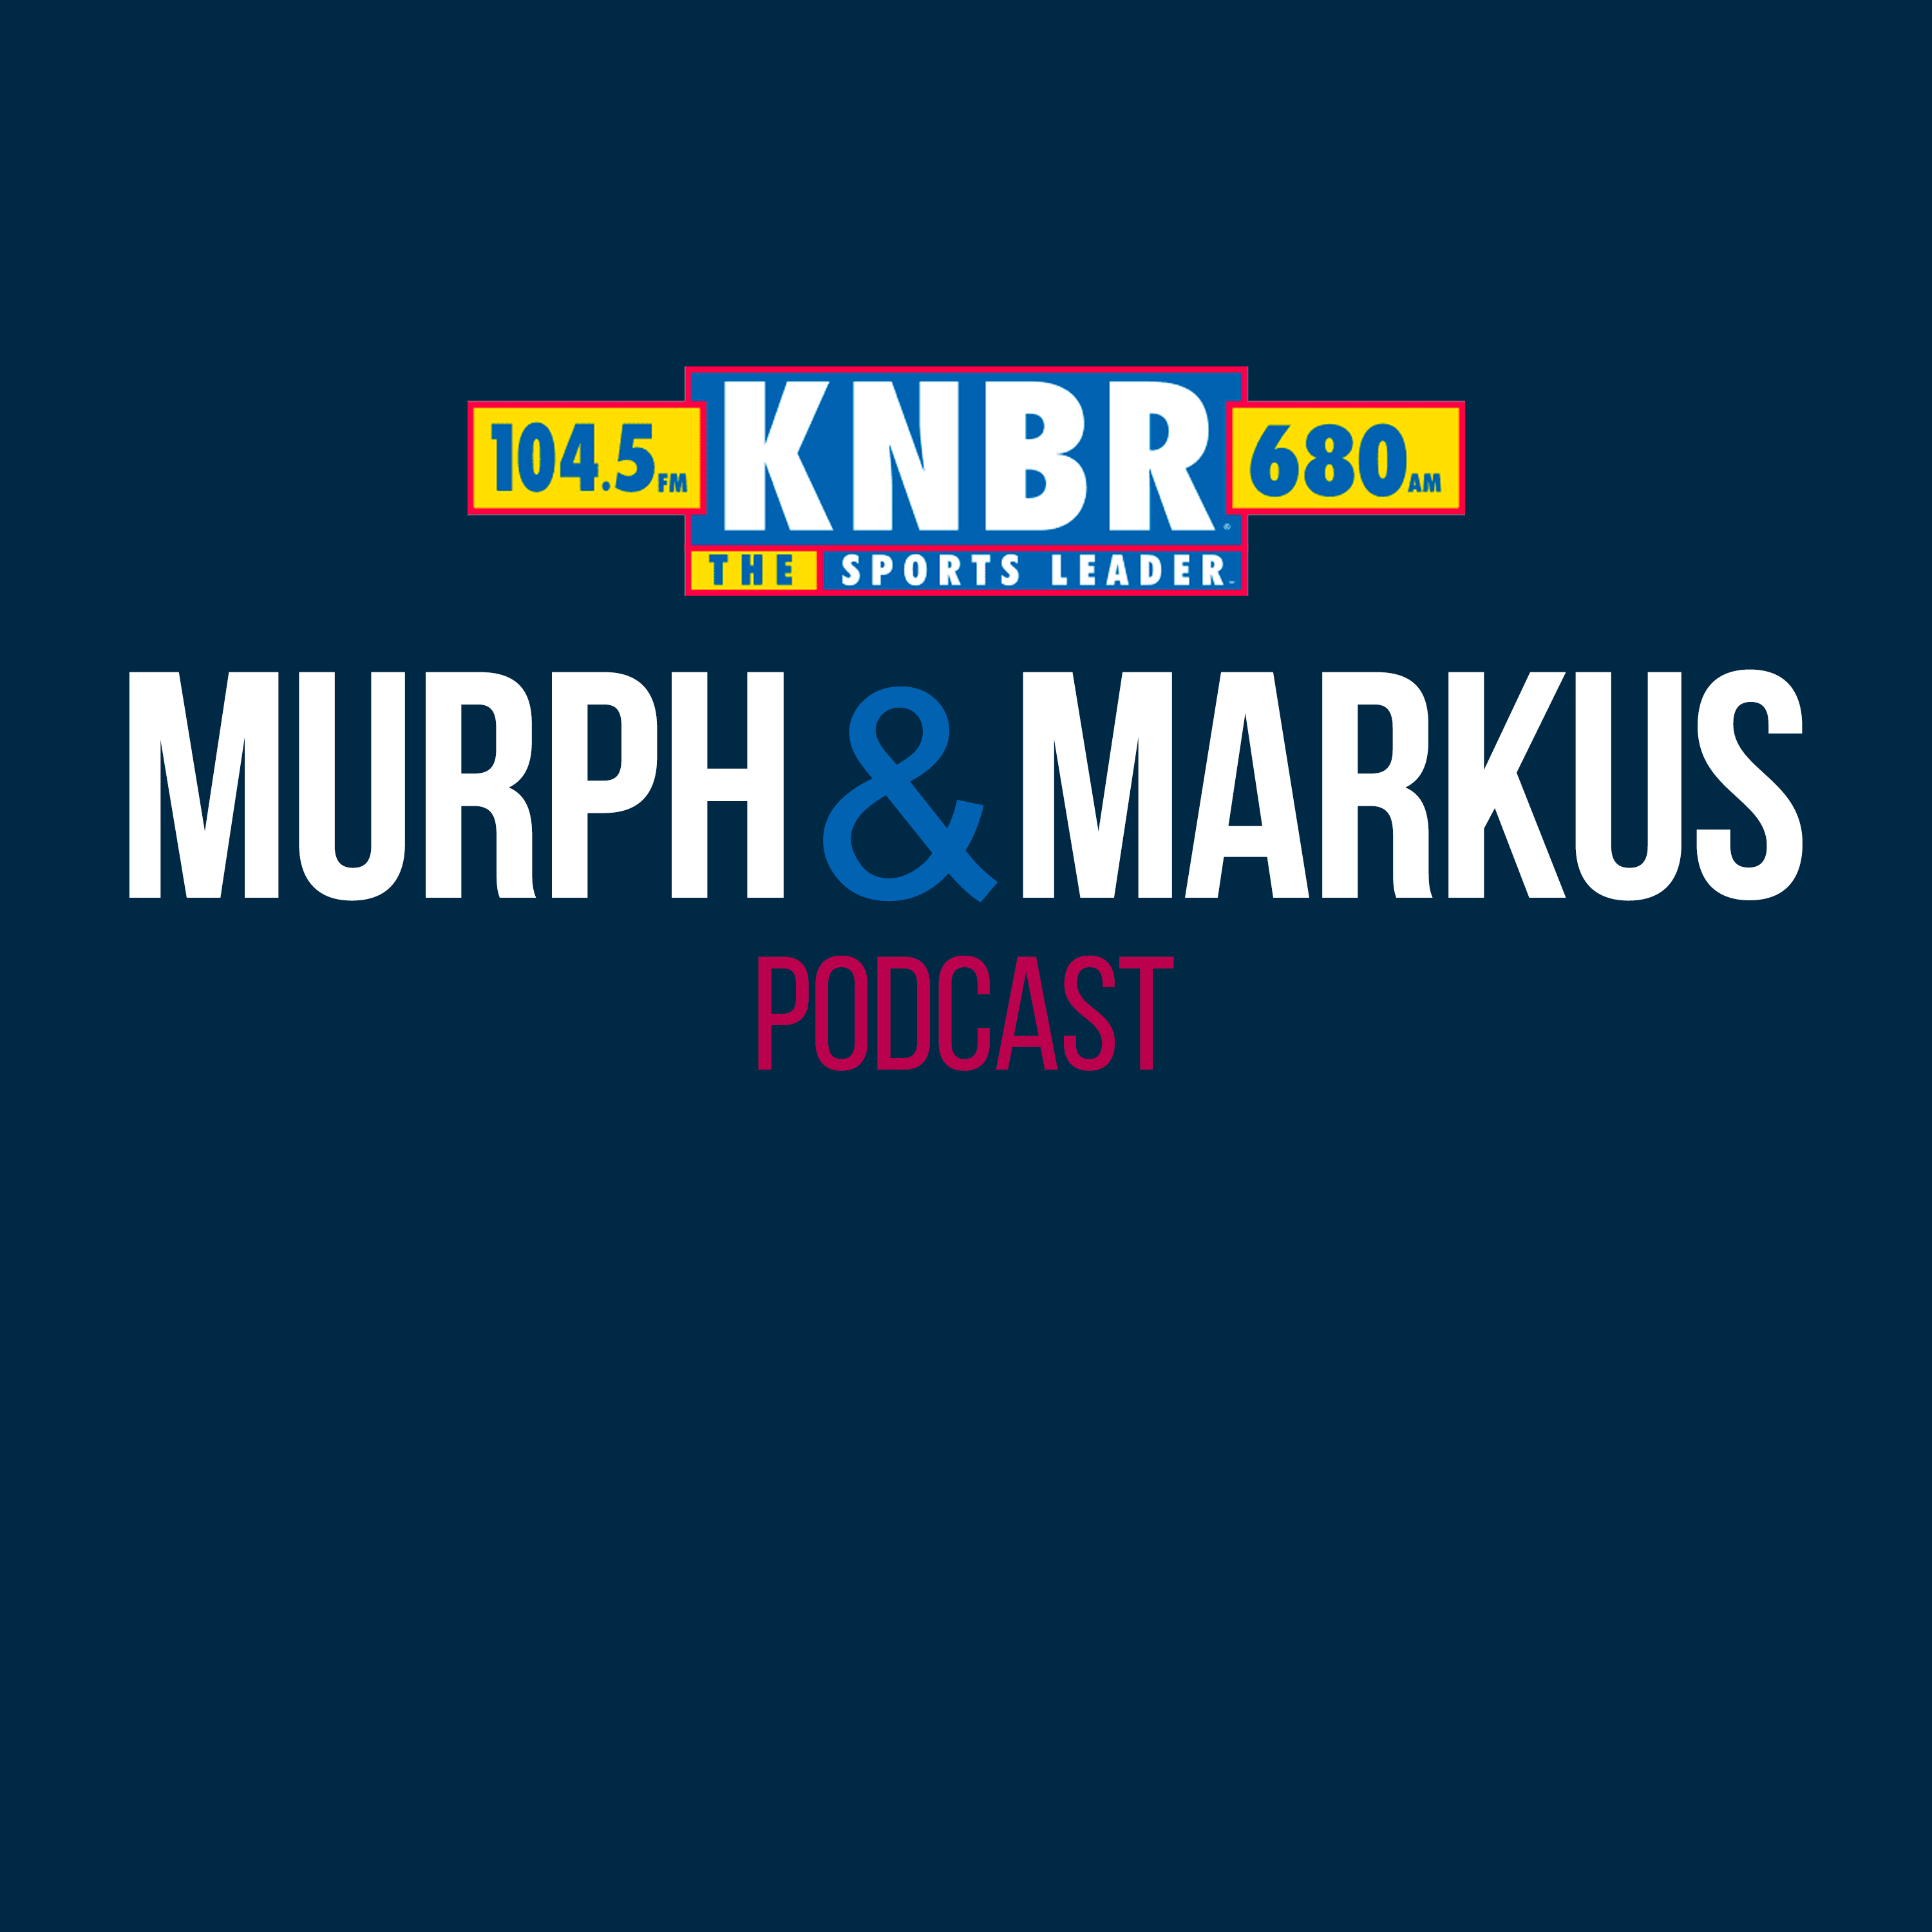 6-24 Garry St. Jean joined Murph & Markus and said the Warriors should try to re-sign Klay Thompson on a short-term contract like Draymond Green